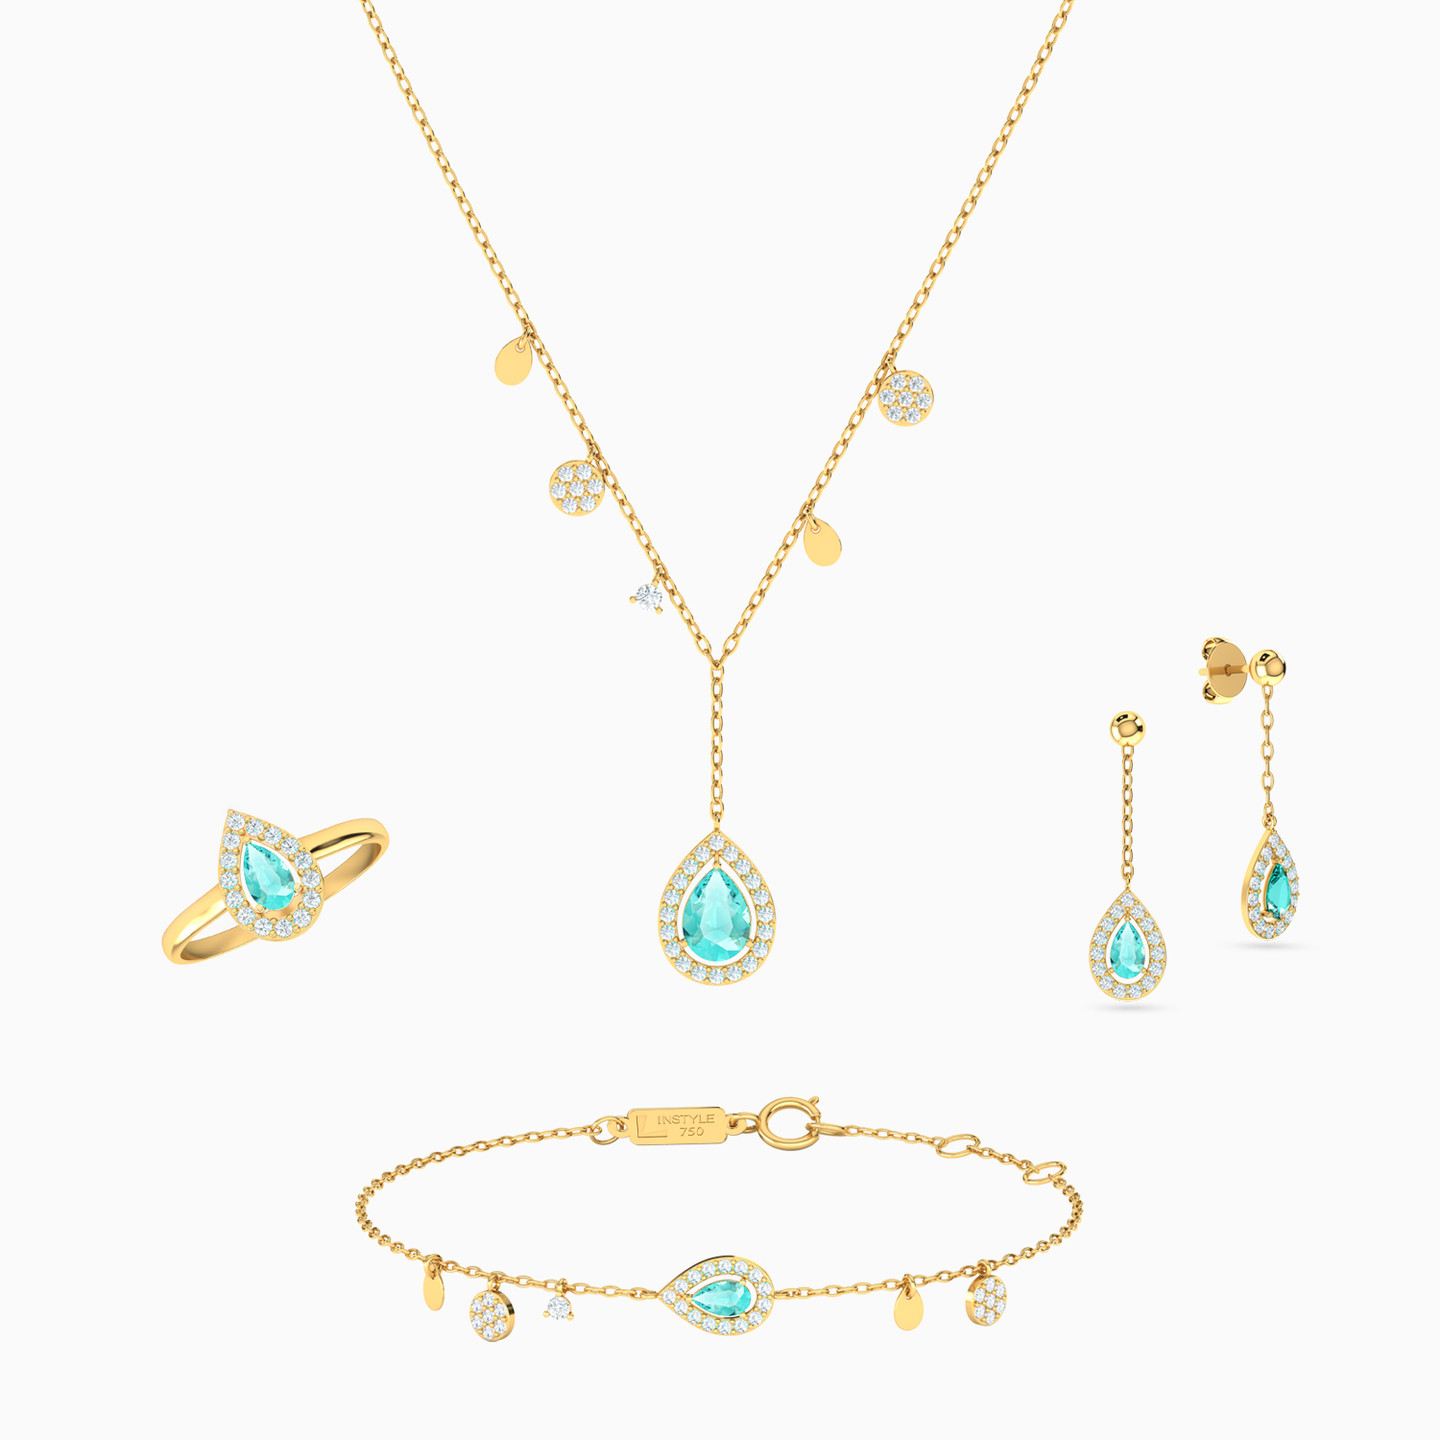 18K Gold Colored Stones Jewelry Set - 4 Pieces